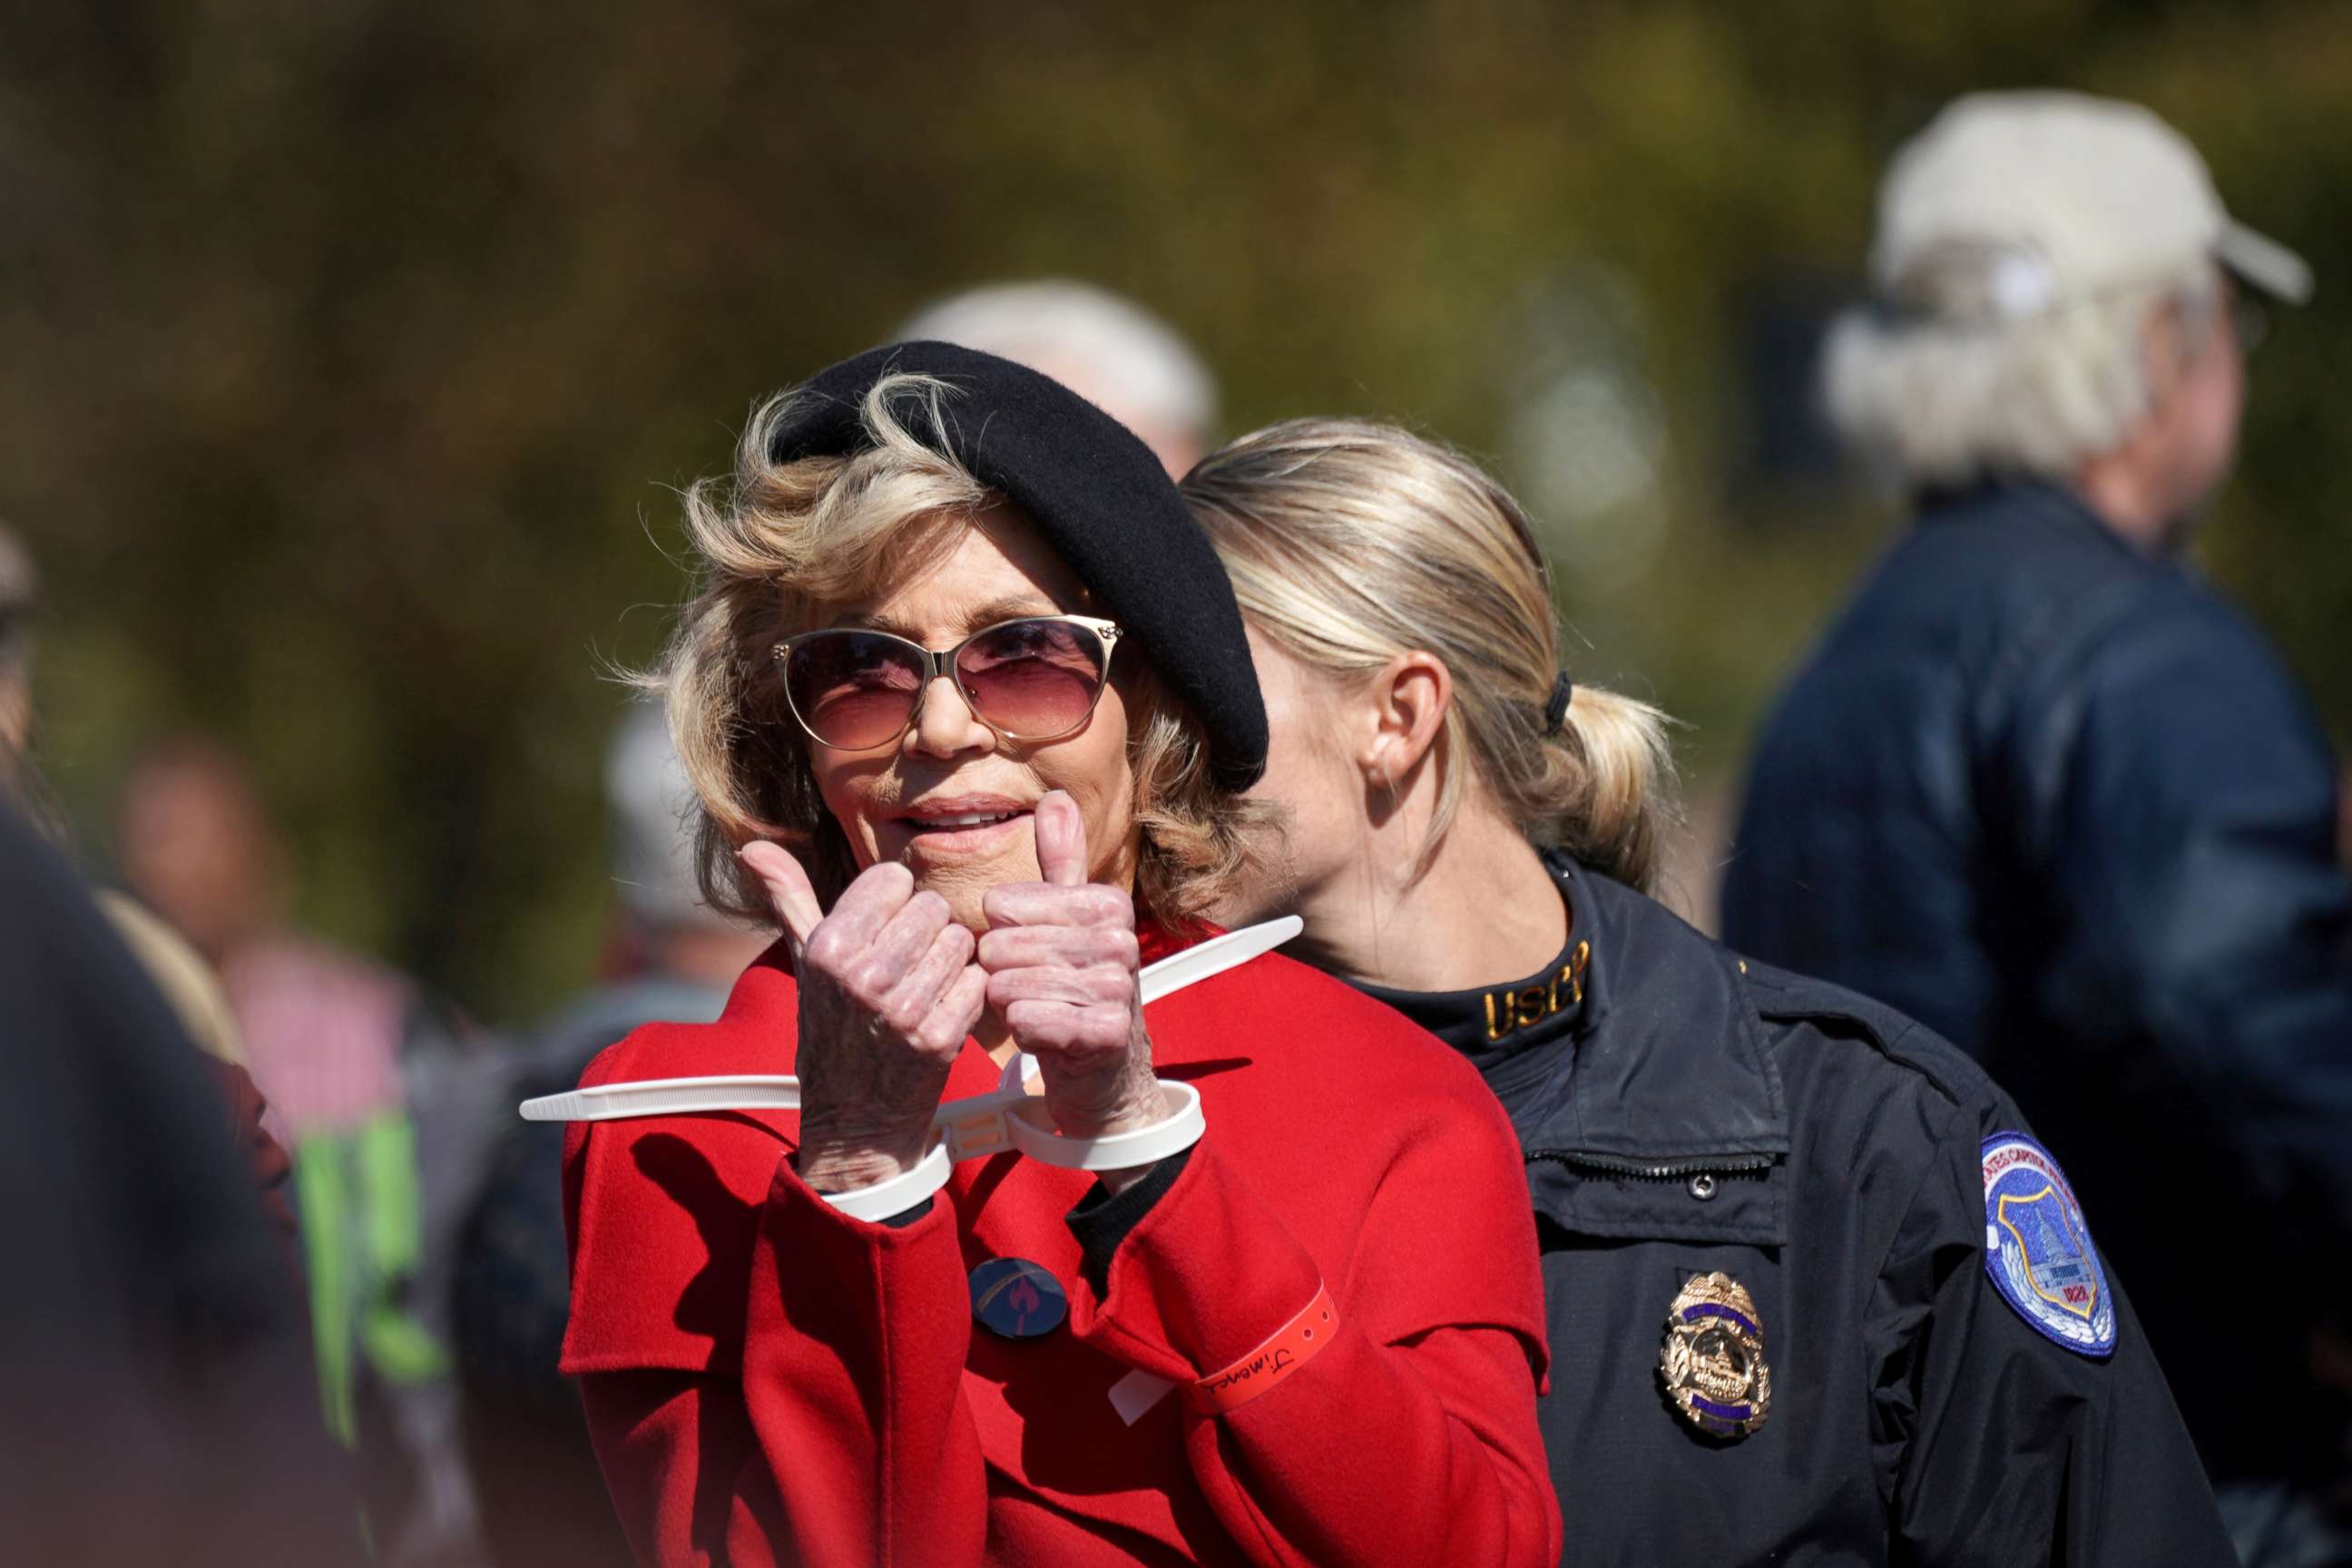 PHOTO: Actor and activist Jane Fonda gives a thumbs up in handcuffs as she is detained for blocking the street in front of the Library of Congress during the "Fire Drill Fridays" protest in Washington, Oct. 18, 2019.